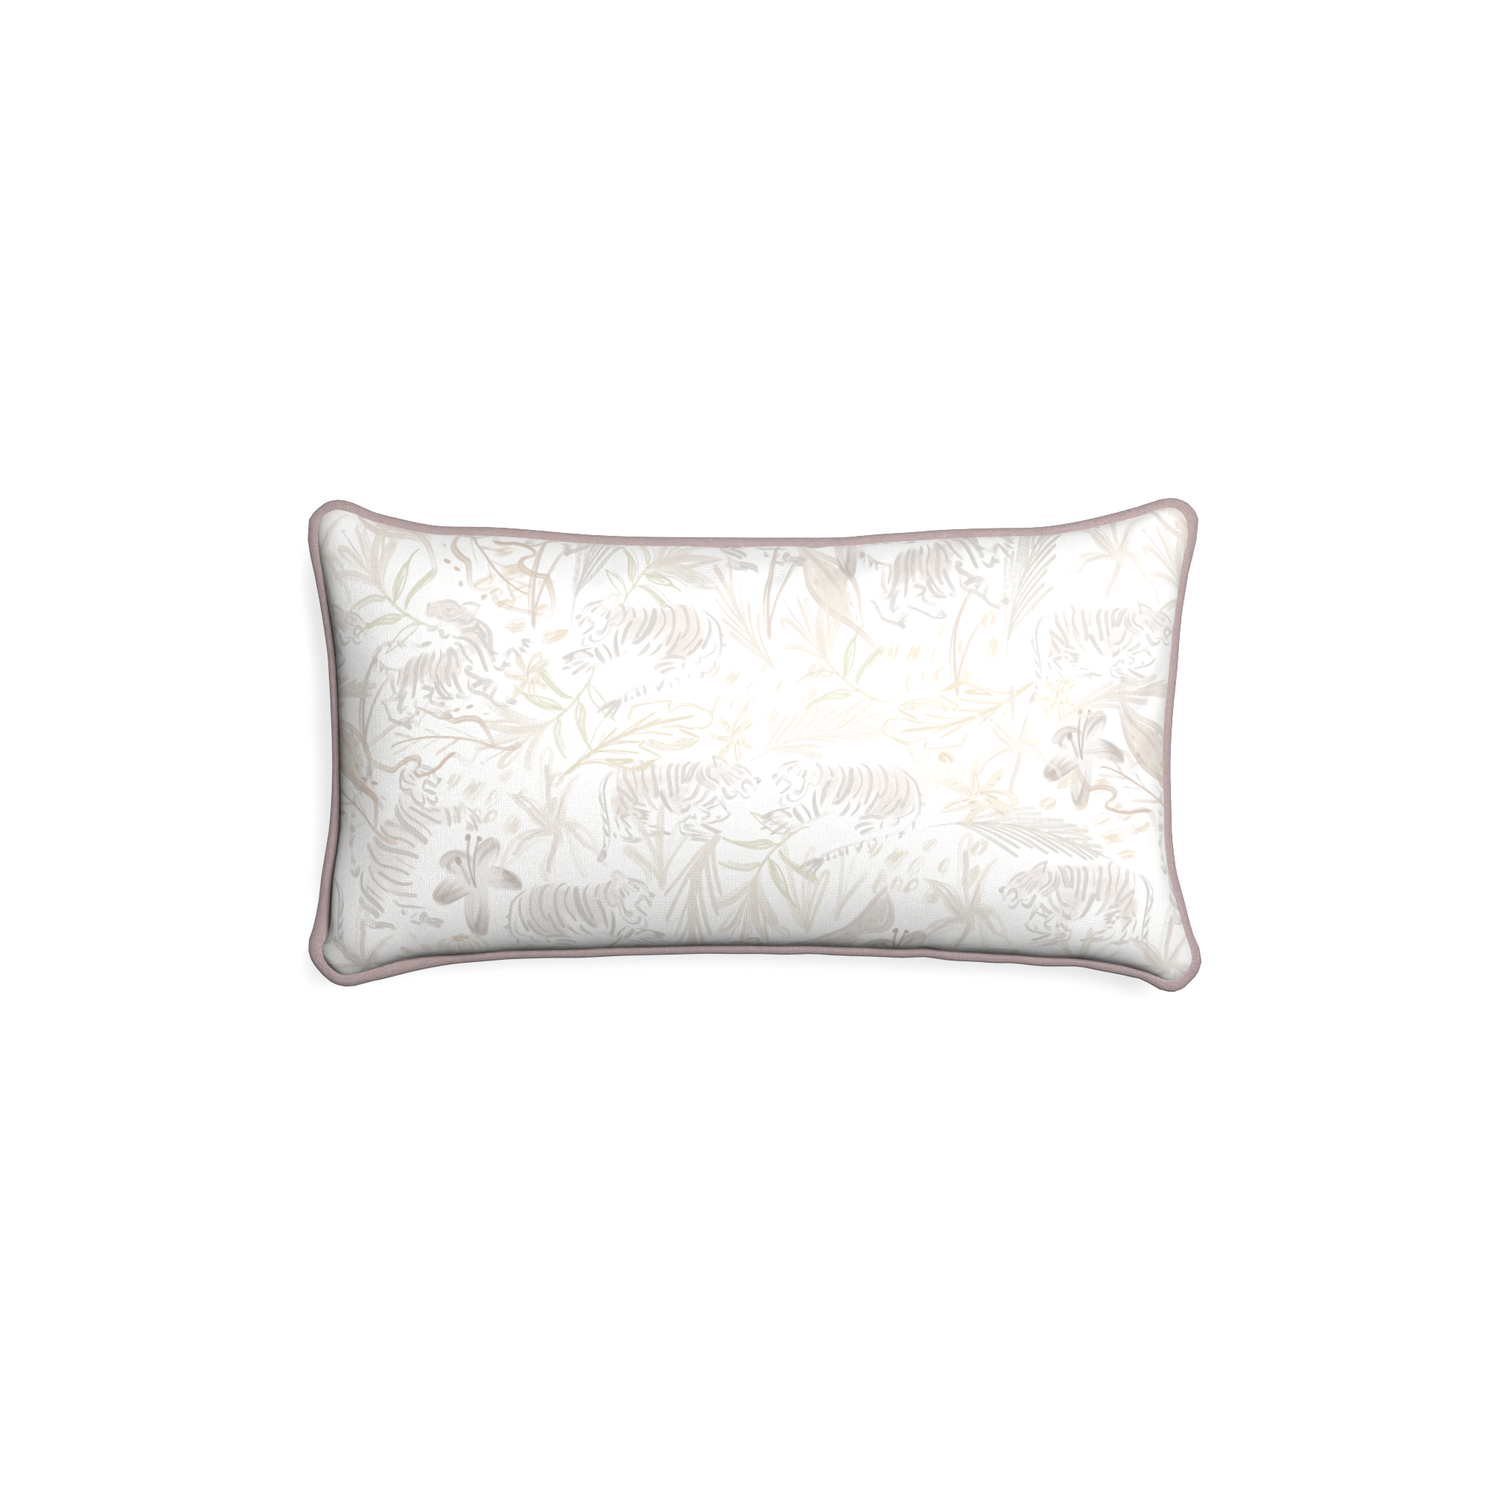 Petite-lumbar frida sand custom beige chinoiserie tigerpillow with orchid piping on white background